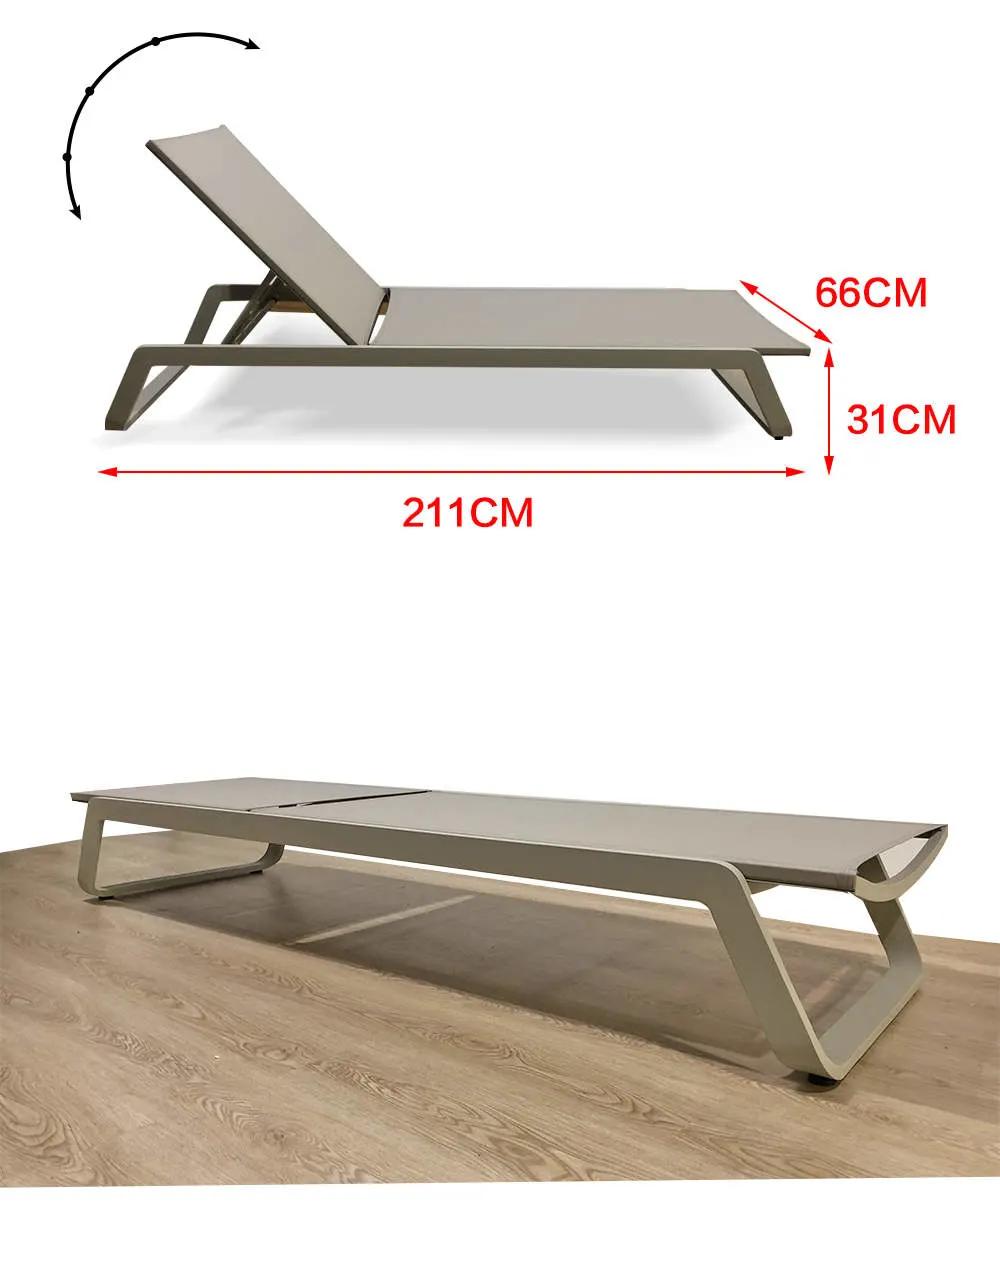 Unfolded New OEM Foshan Aluminum Hotel Chaise Lounge Sun Lounger with Cheap Price